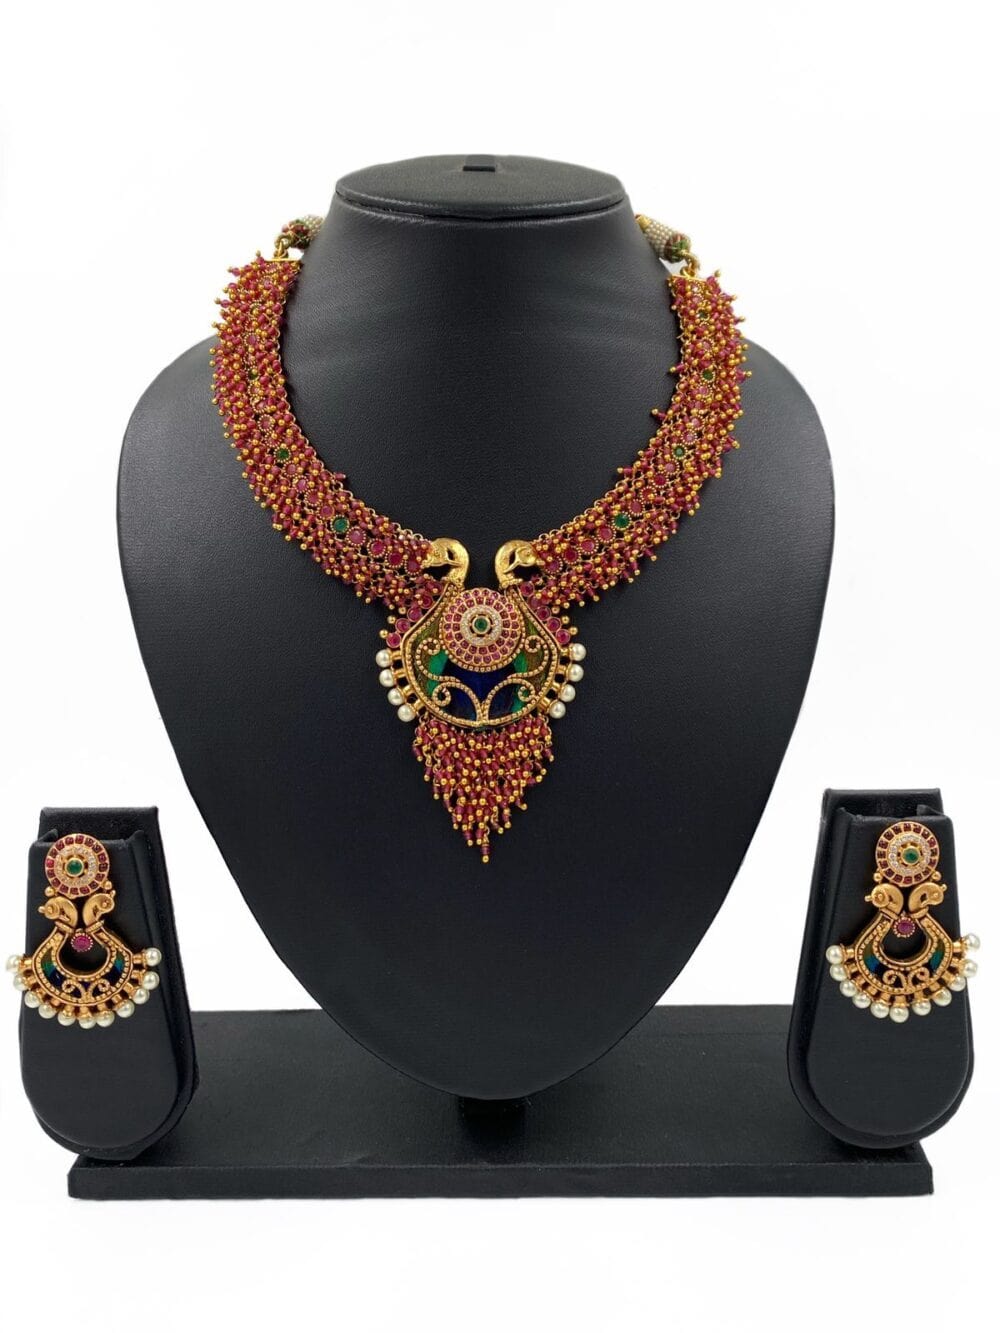 Designer Gold Plated Peacock Design Temple Necklace Set For Women By Gehna Shop Temple Necklace Sets